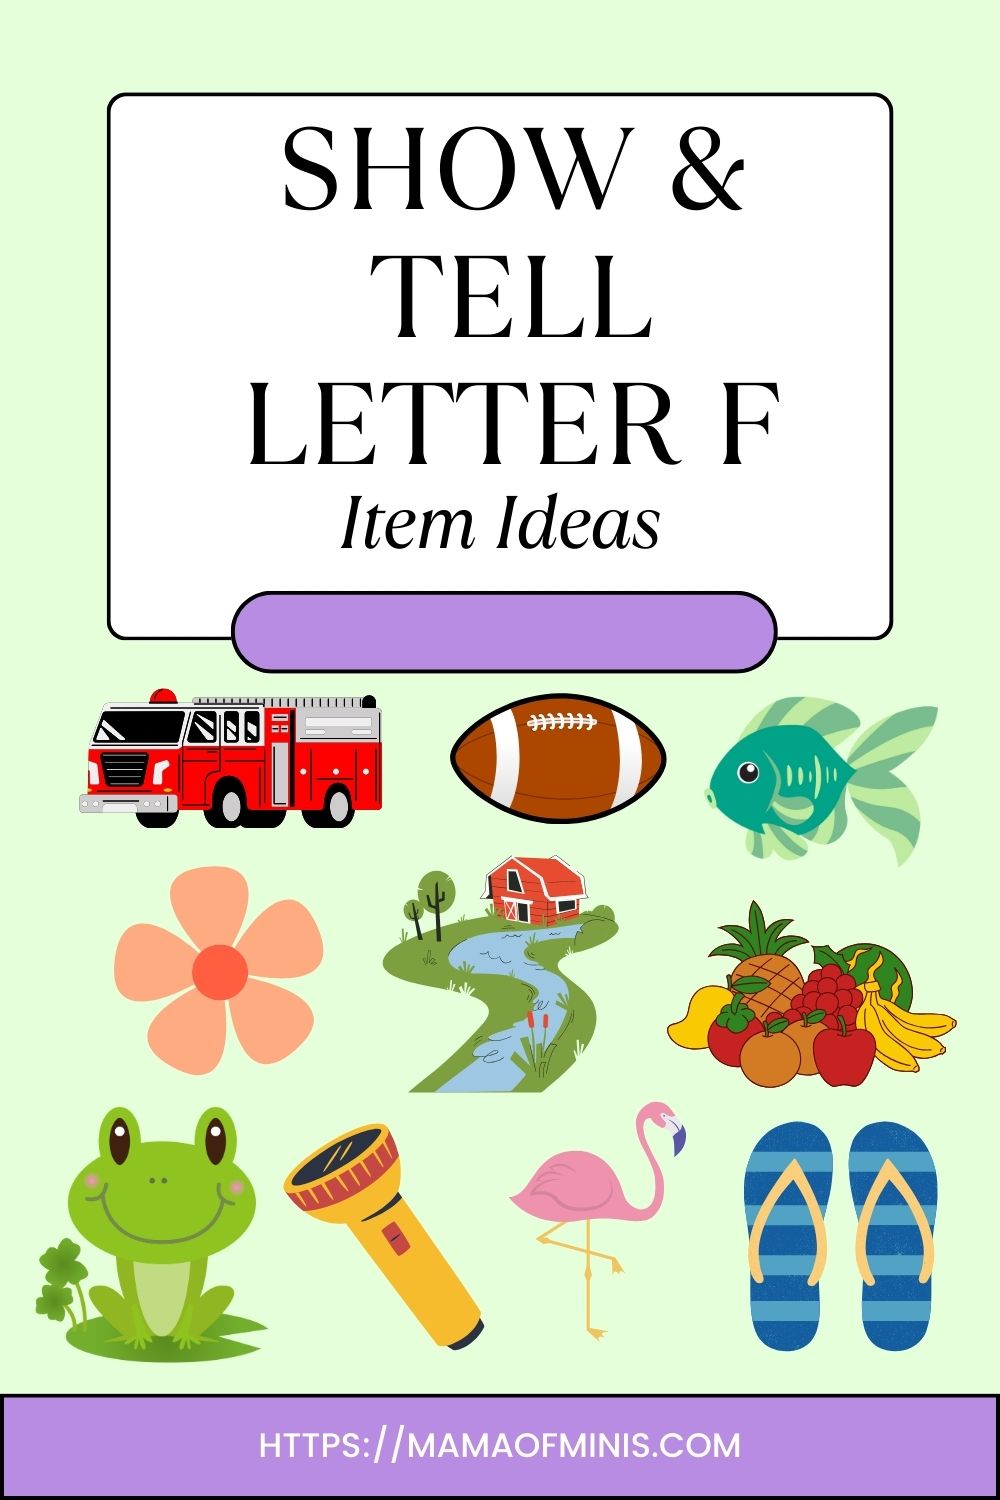 Item Ideas for Show and Tell Letter F